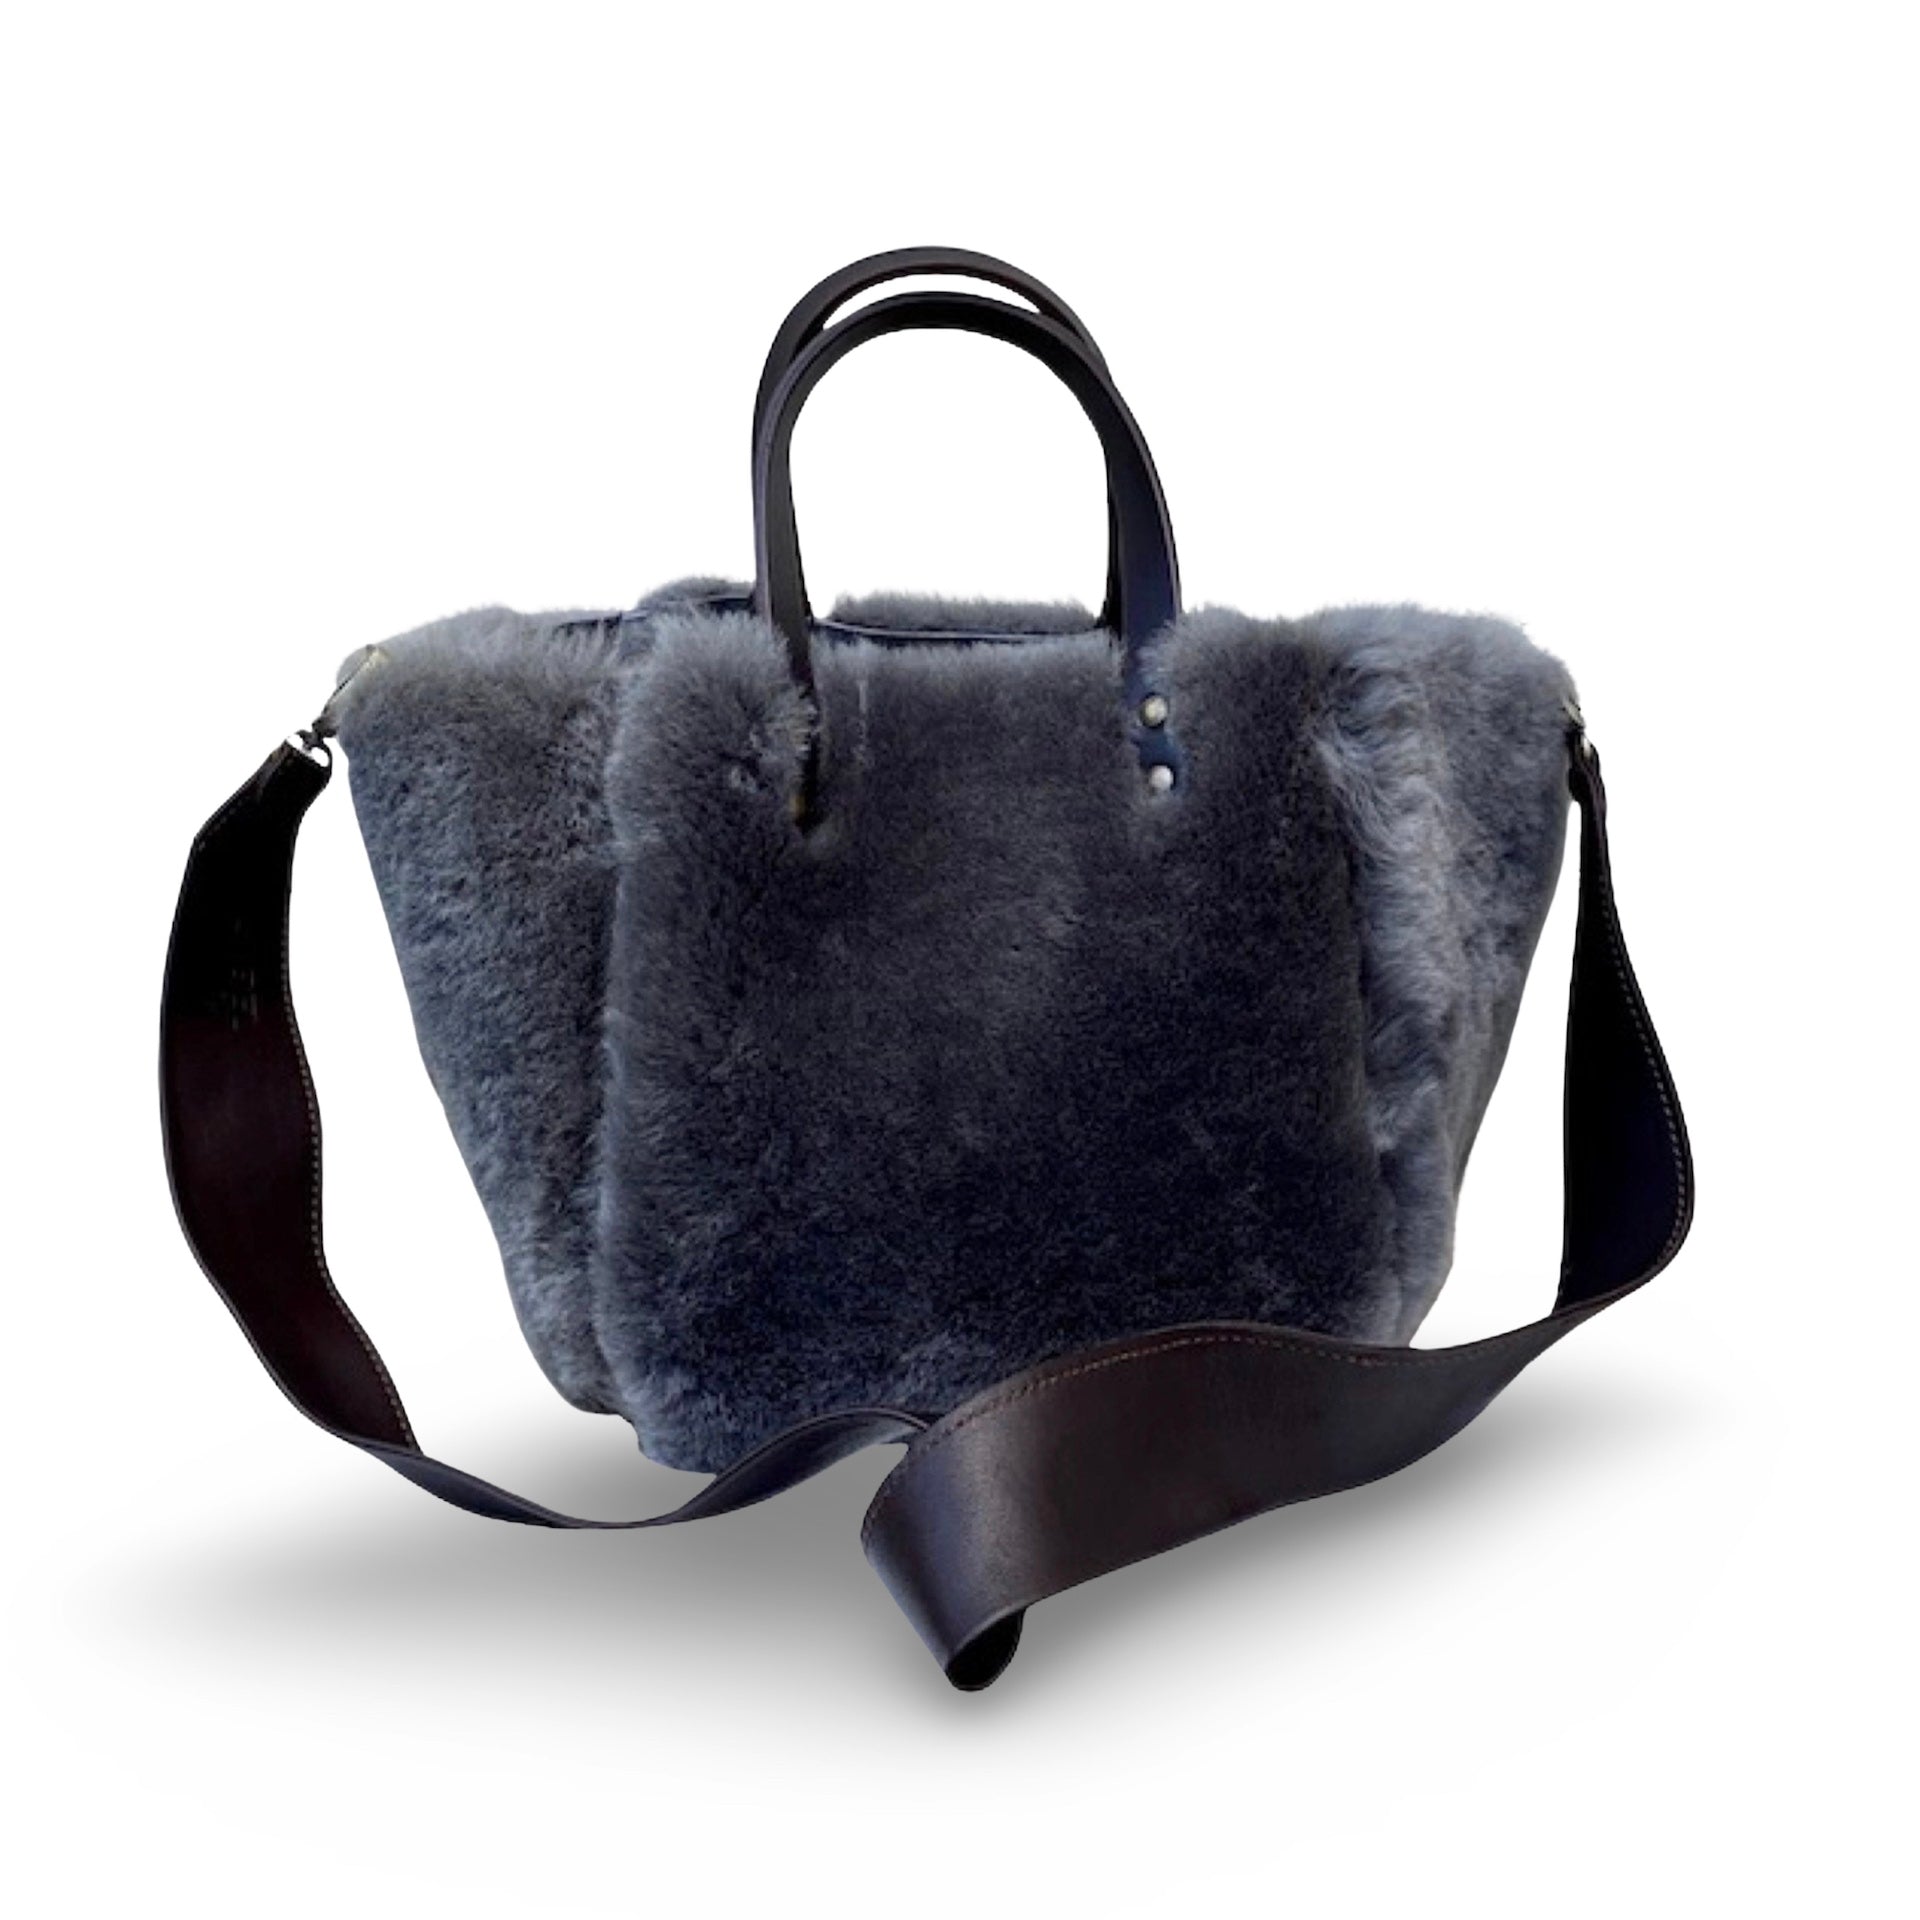 LABEL17 presents The Handbag Shearling Reversible Medium in Anthracite, Made in Switzerland